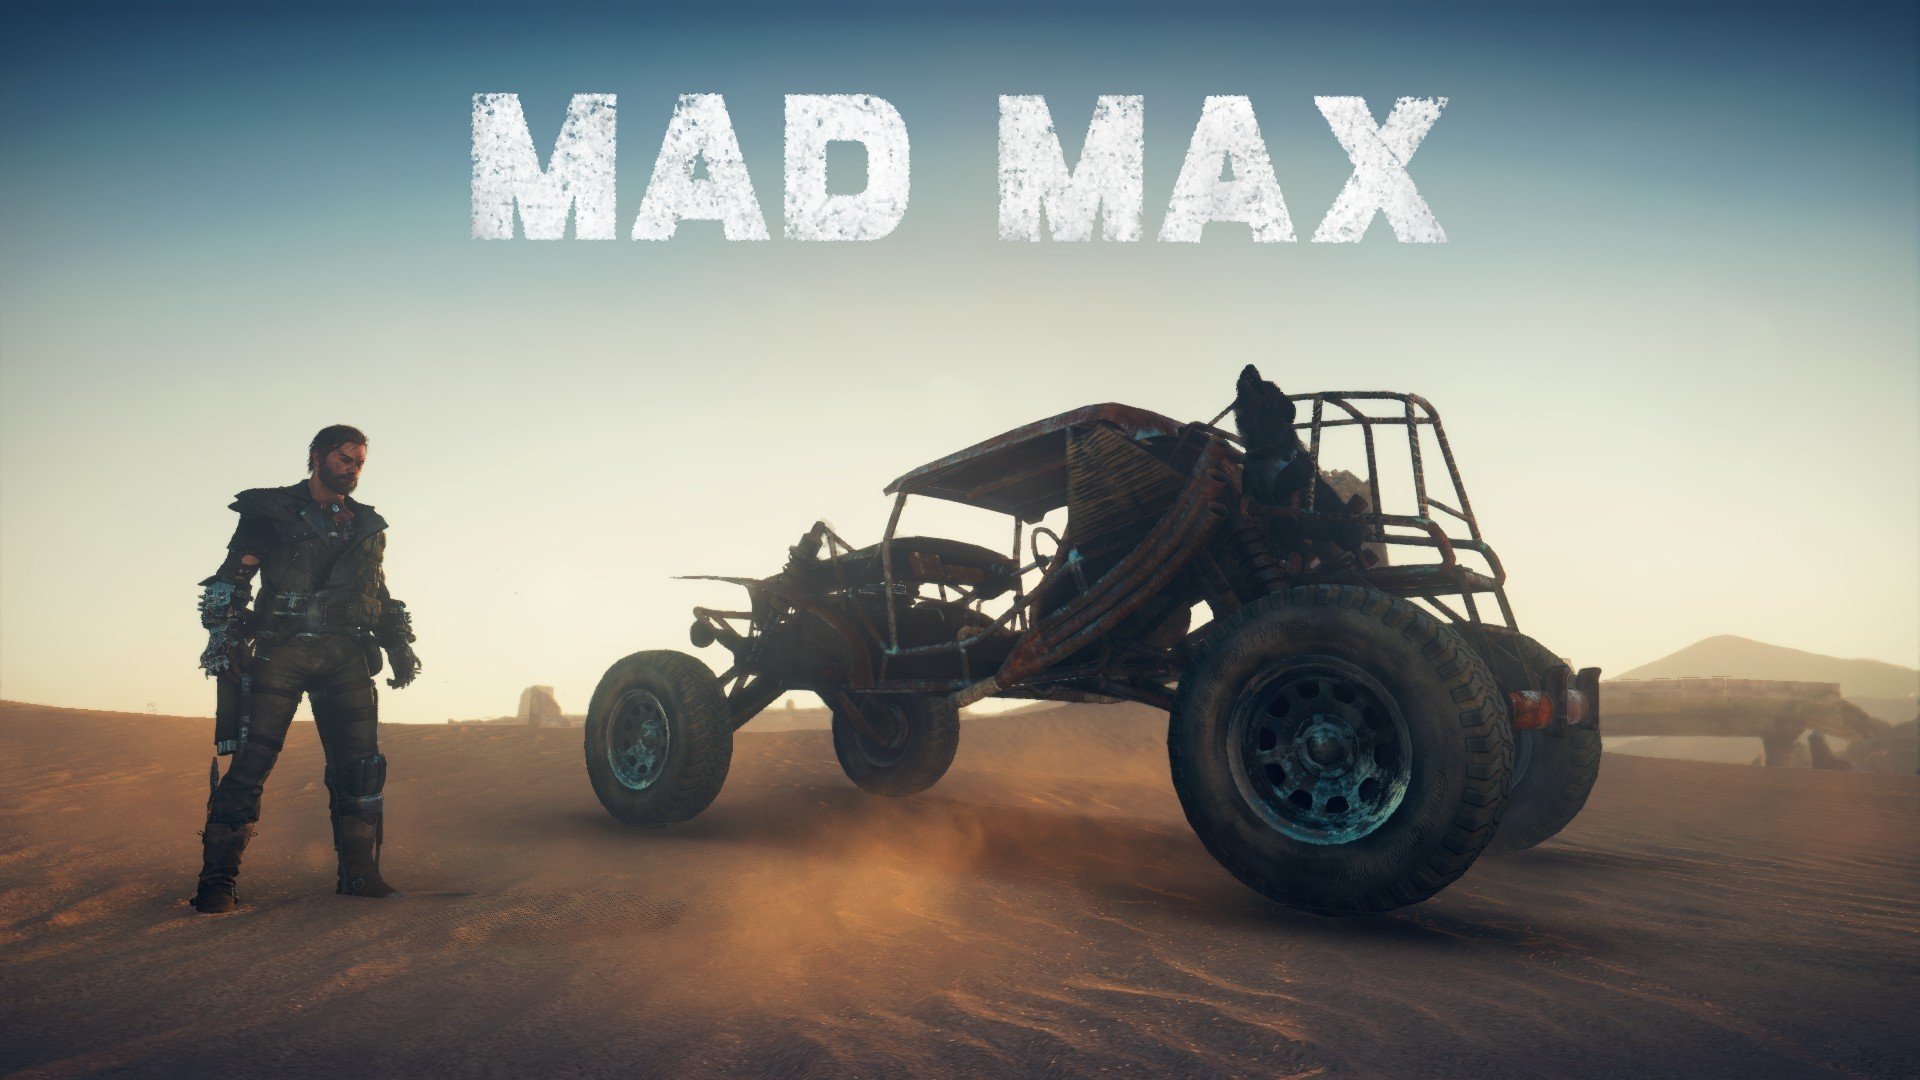 Mad Max, Mad Max game, Dinki Di, PC gaming, Buggy, Sun, Sand, Desert, Video games Wallpaper